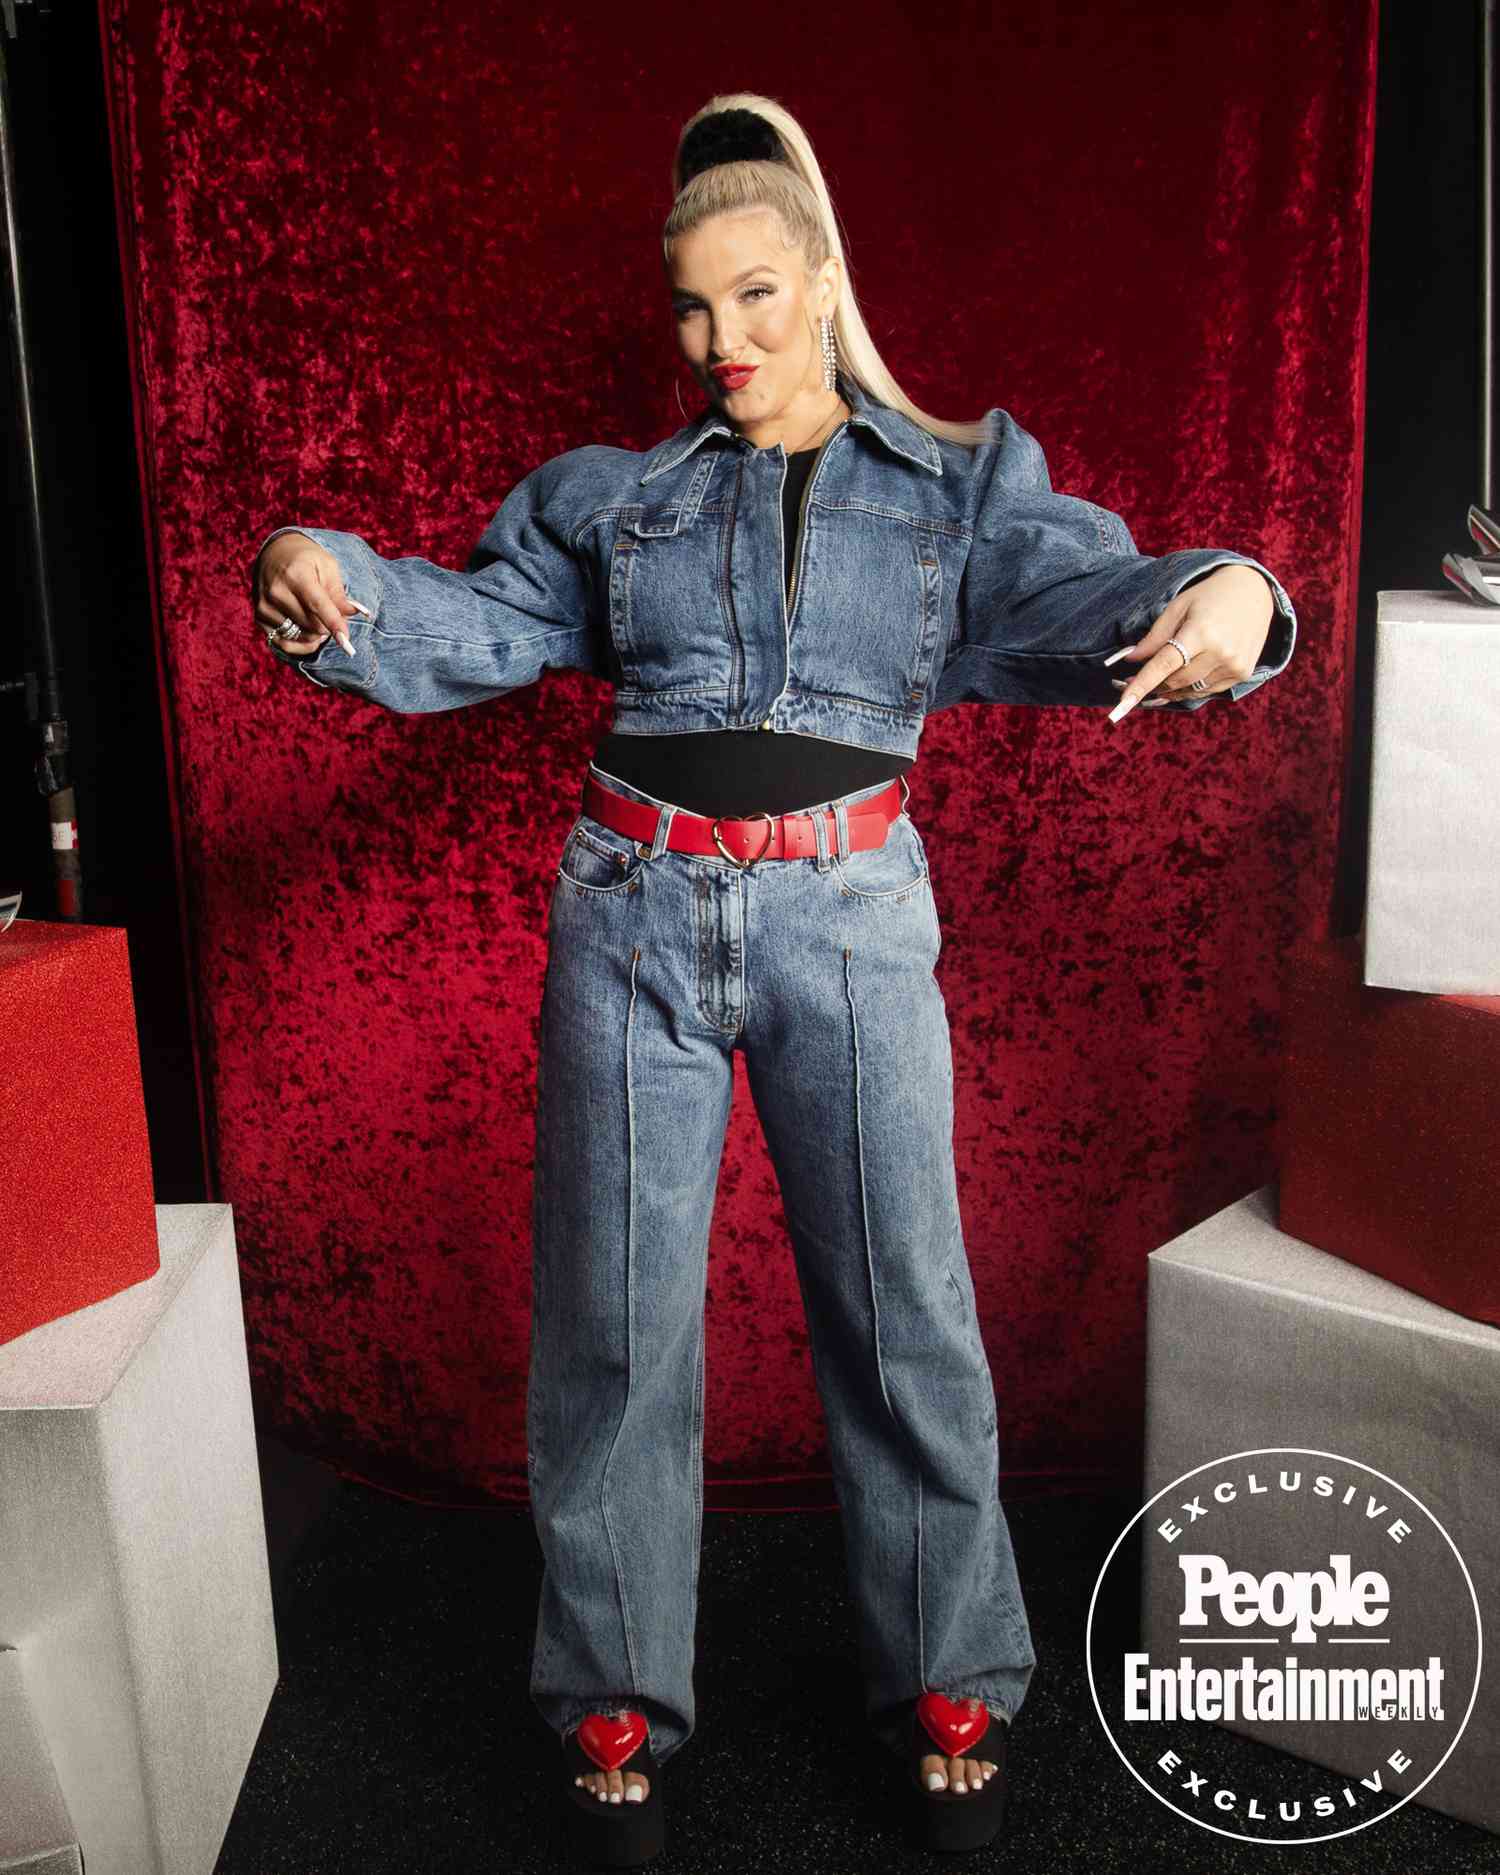 Joelle James photographed in the 2023 PEOPLE and Entertainment Weekly Jingle Ball portrait studio